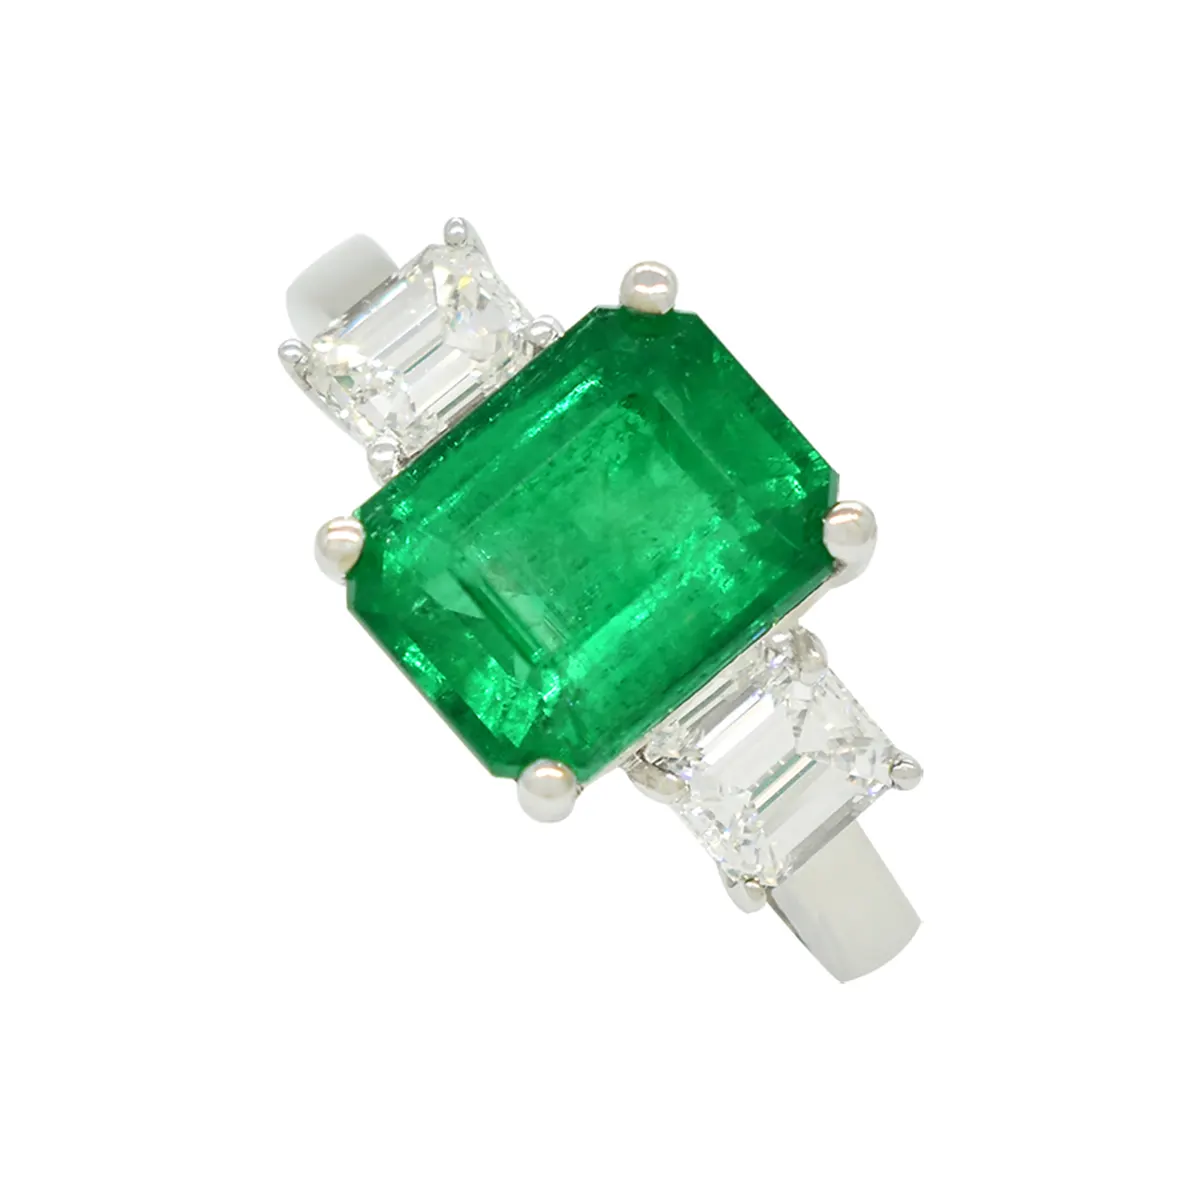 emerald-ring-in-18k-white-gold-with-emerald-cut-diamonds-in-3-stones-ring-style